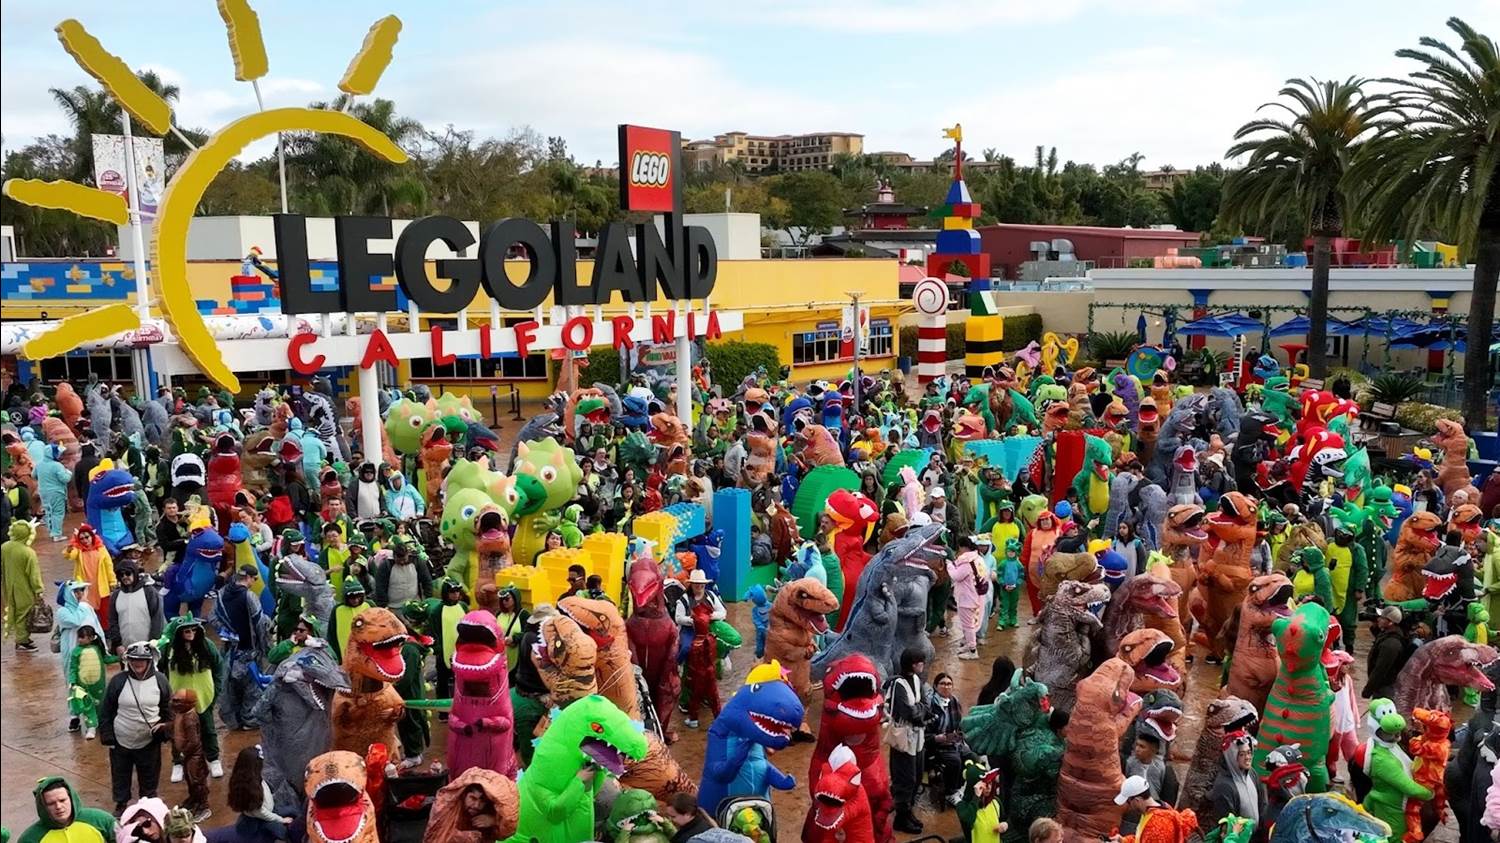 LEGOLAND California Resort Breaks World Record for Dino Costume Party During Dino Valley Date Announcement